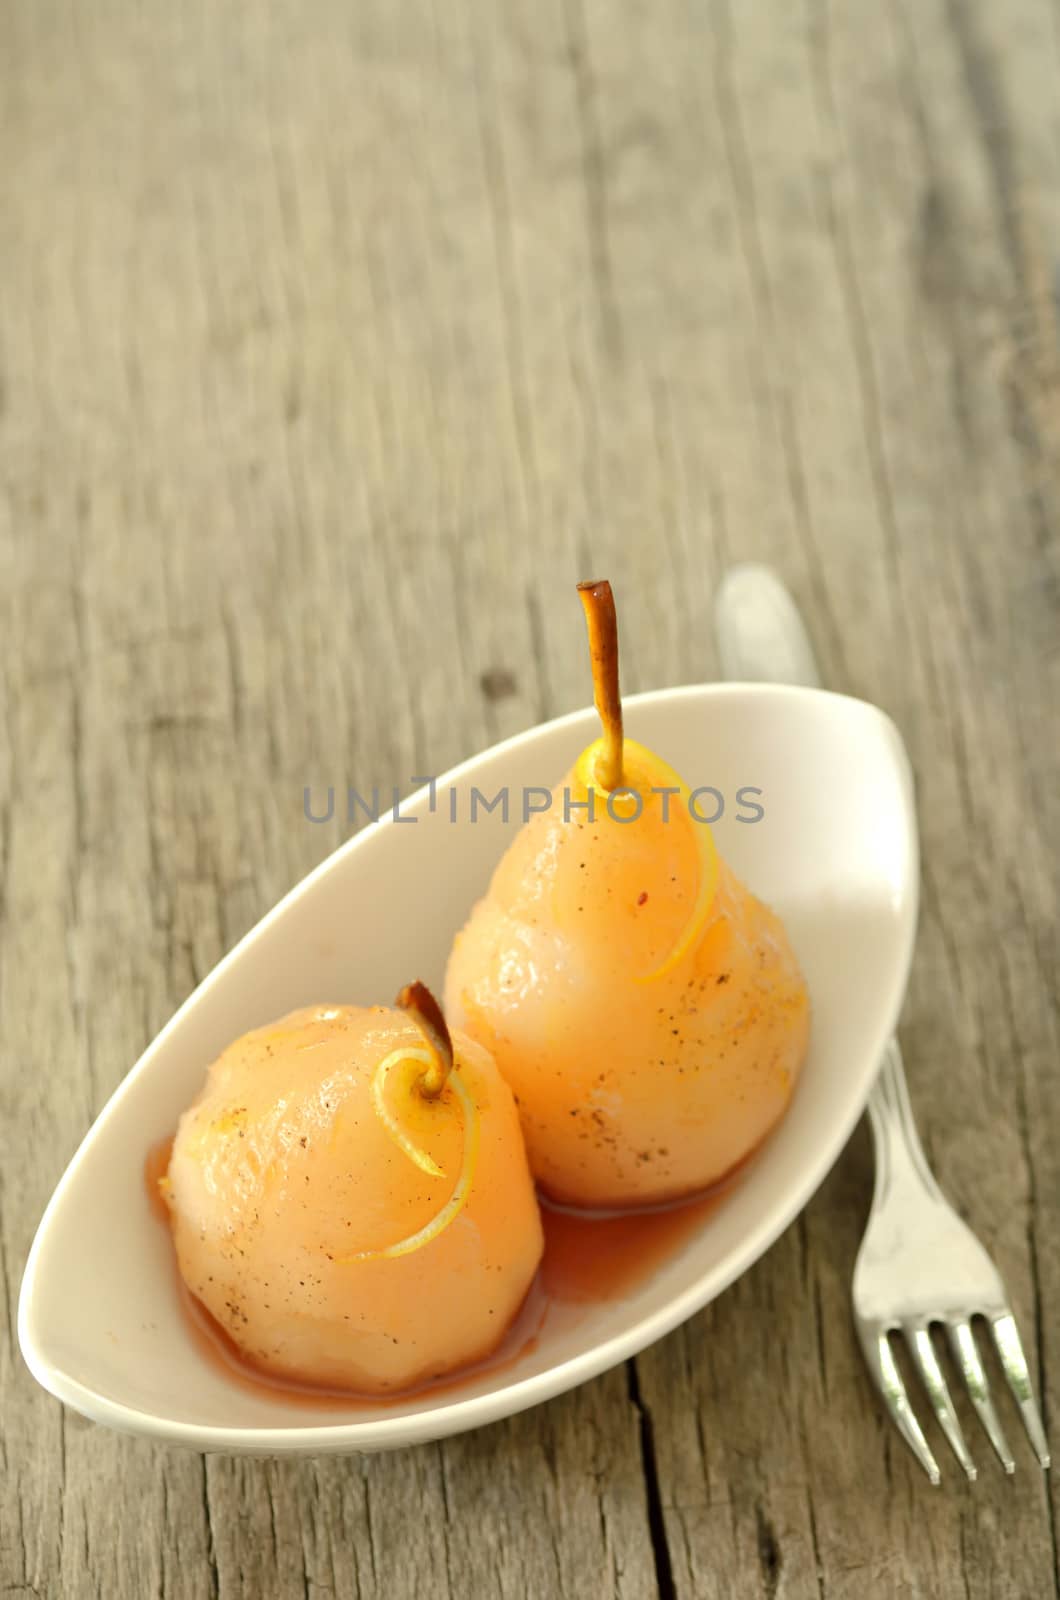 poached pears by mady70